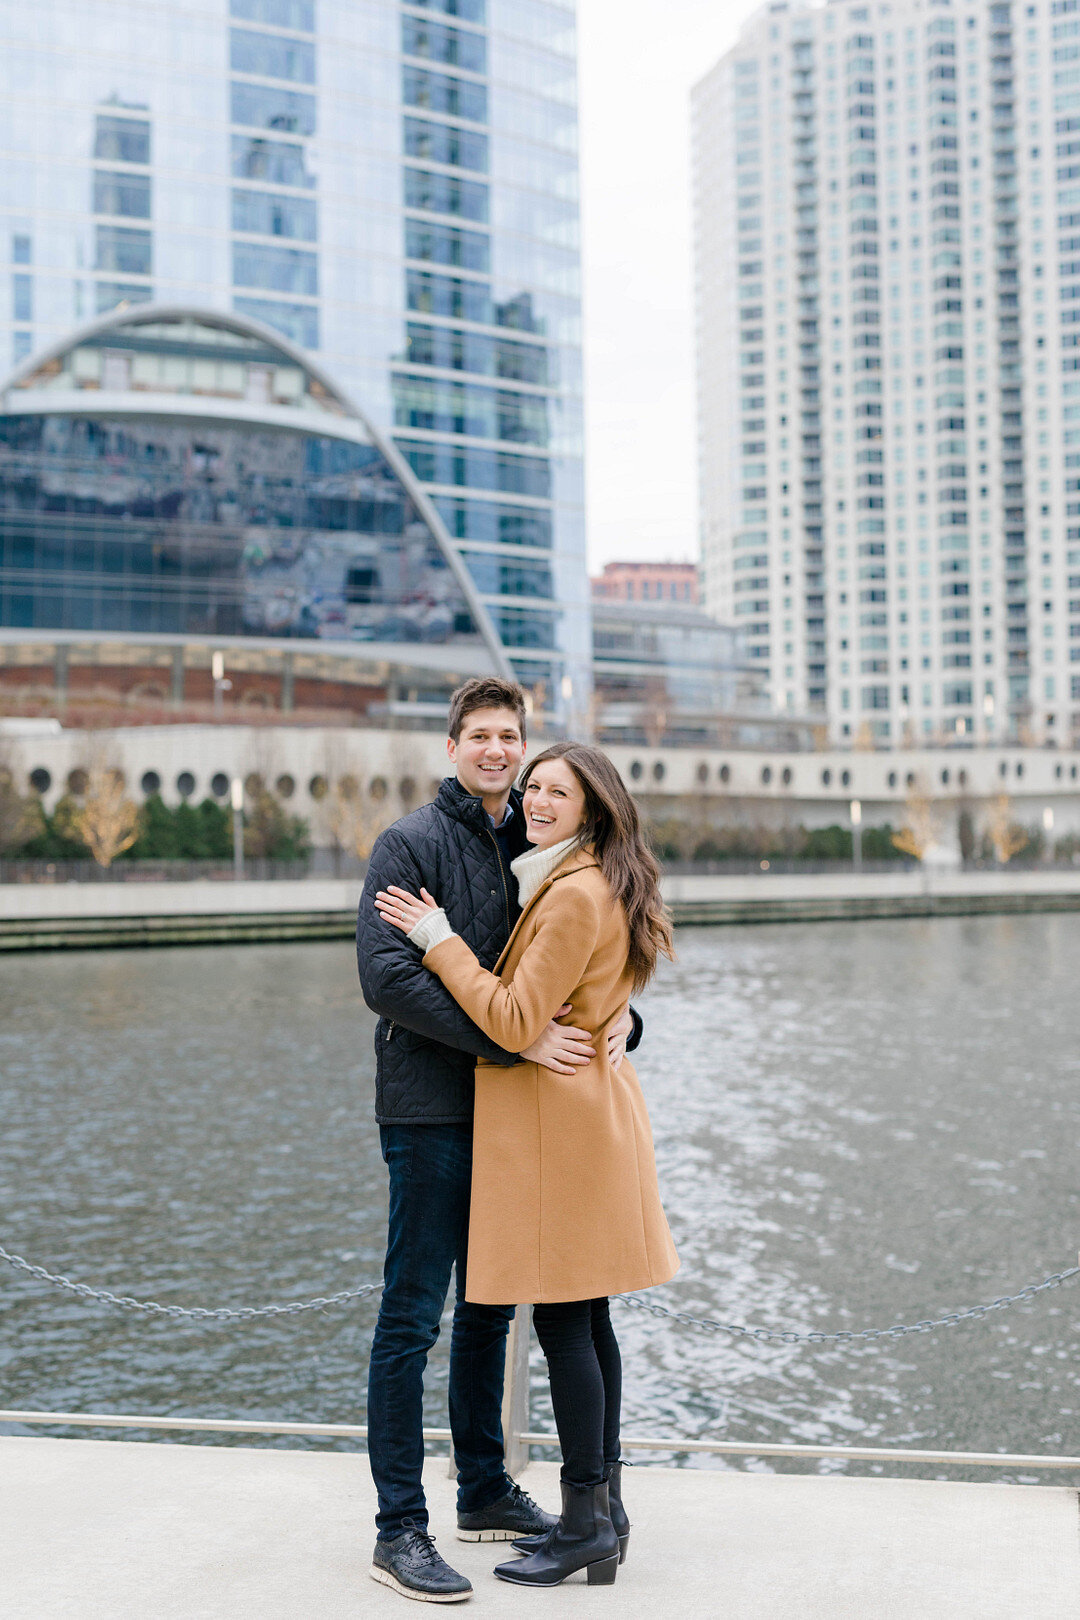 Winter Riverside Engagement Session captured by Molly C. Photography